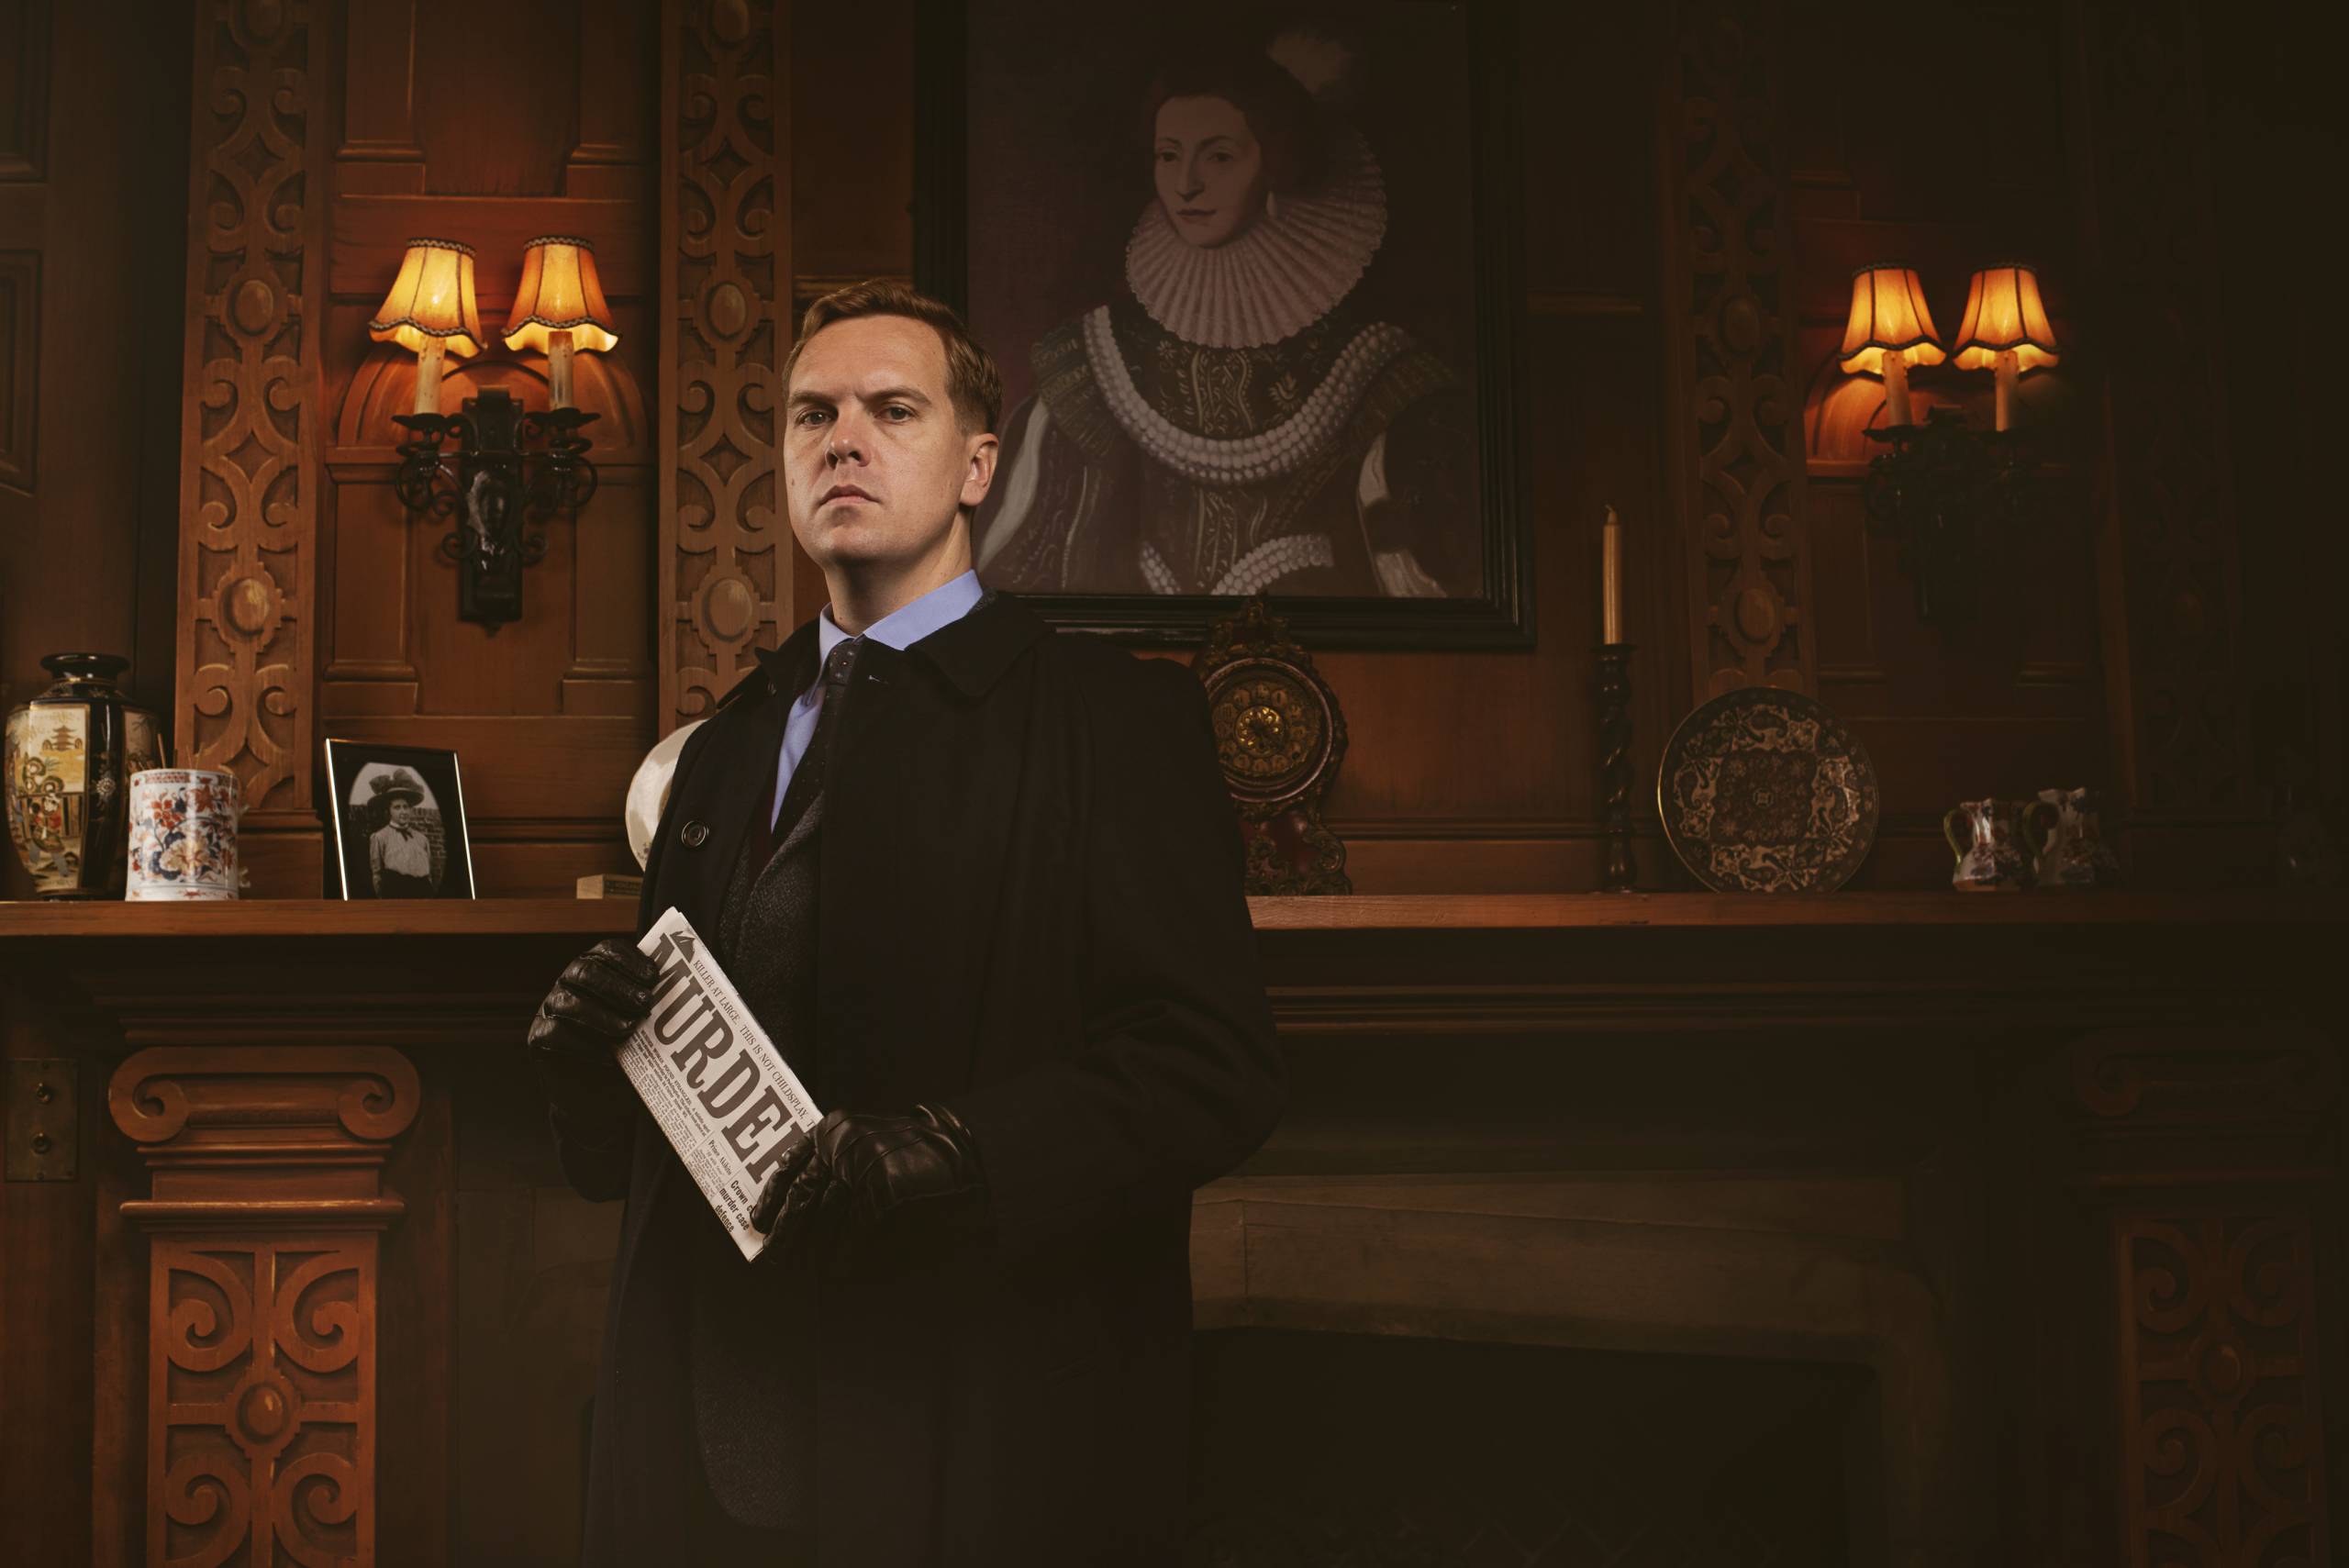 Lawrence Pears as Giles Ralston. The Mousetrap 70th Anniversary Tour. Photo by Matt Crockett